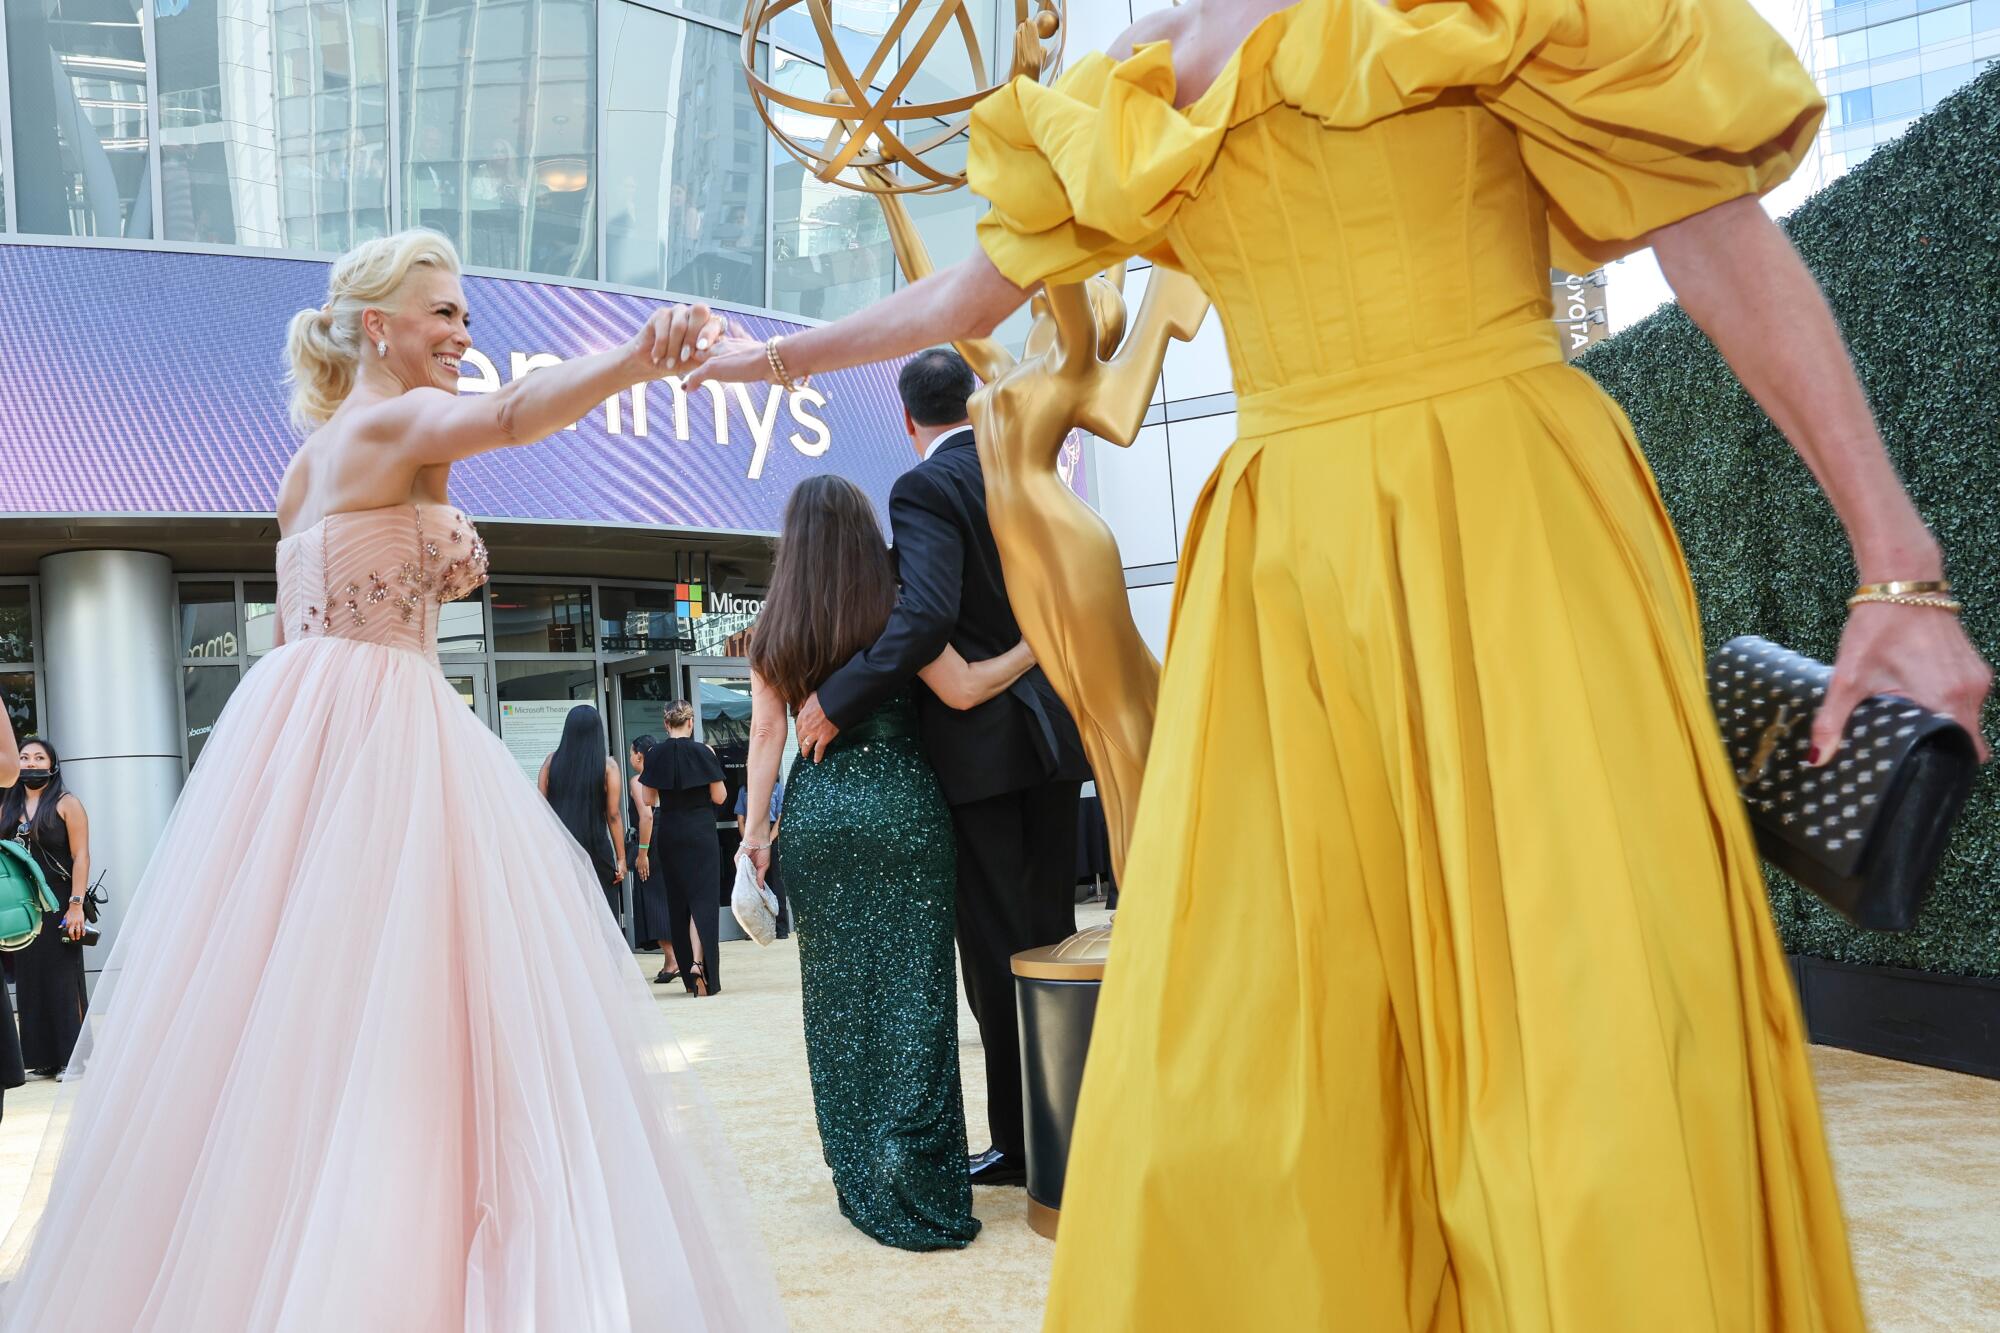 A woman in a glamorous pink dress reaches out to take the hand of a woman in a yellow dress.